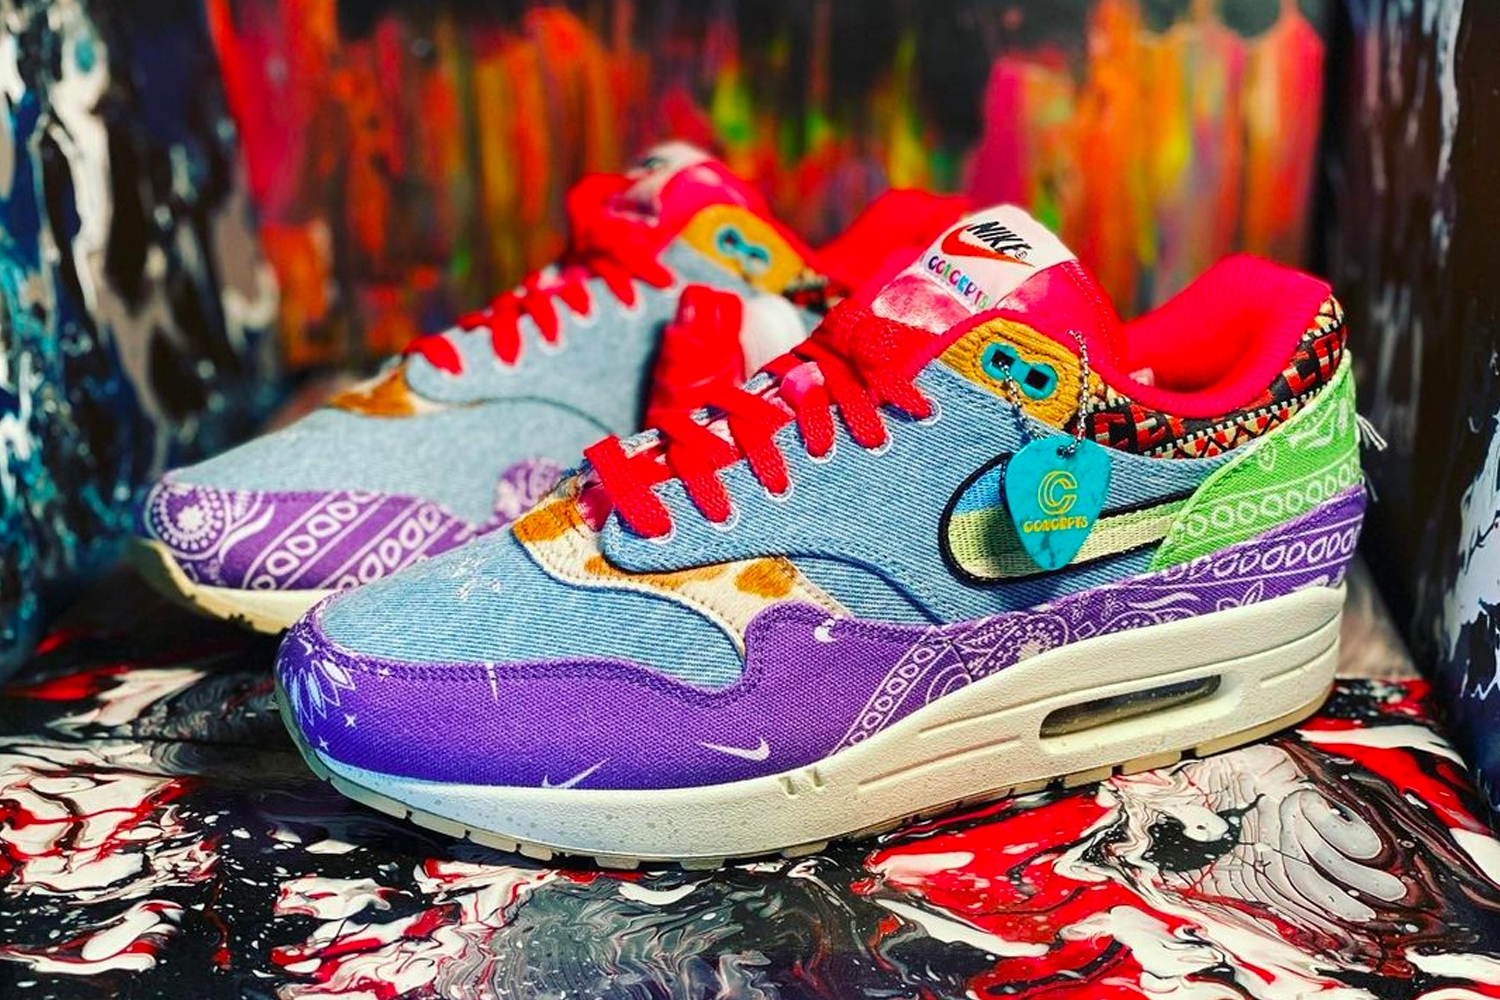 Concepts x Nike Air Max 1 comes with two colorways